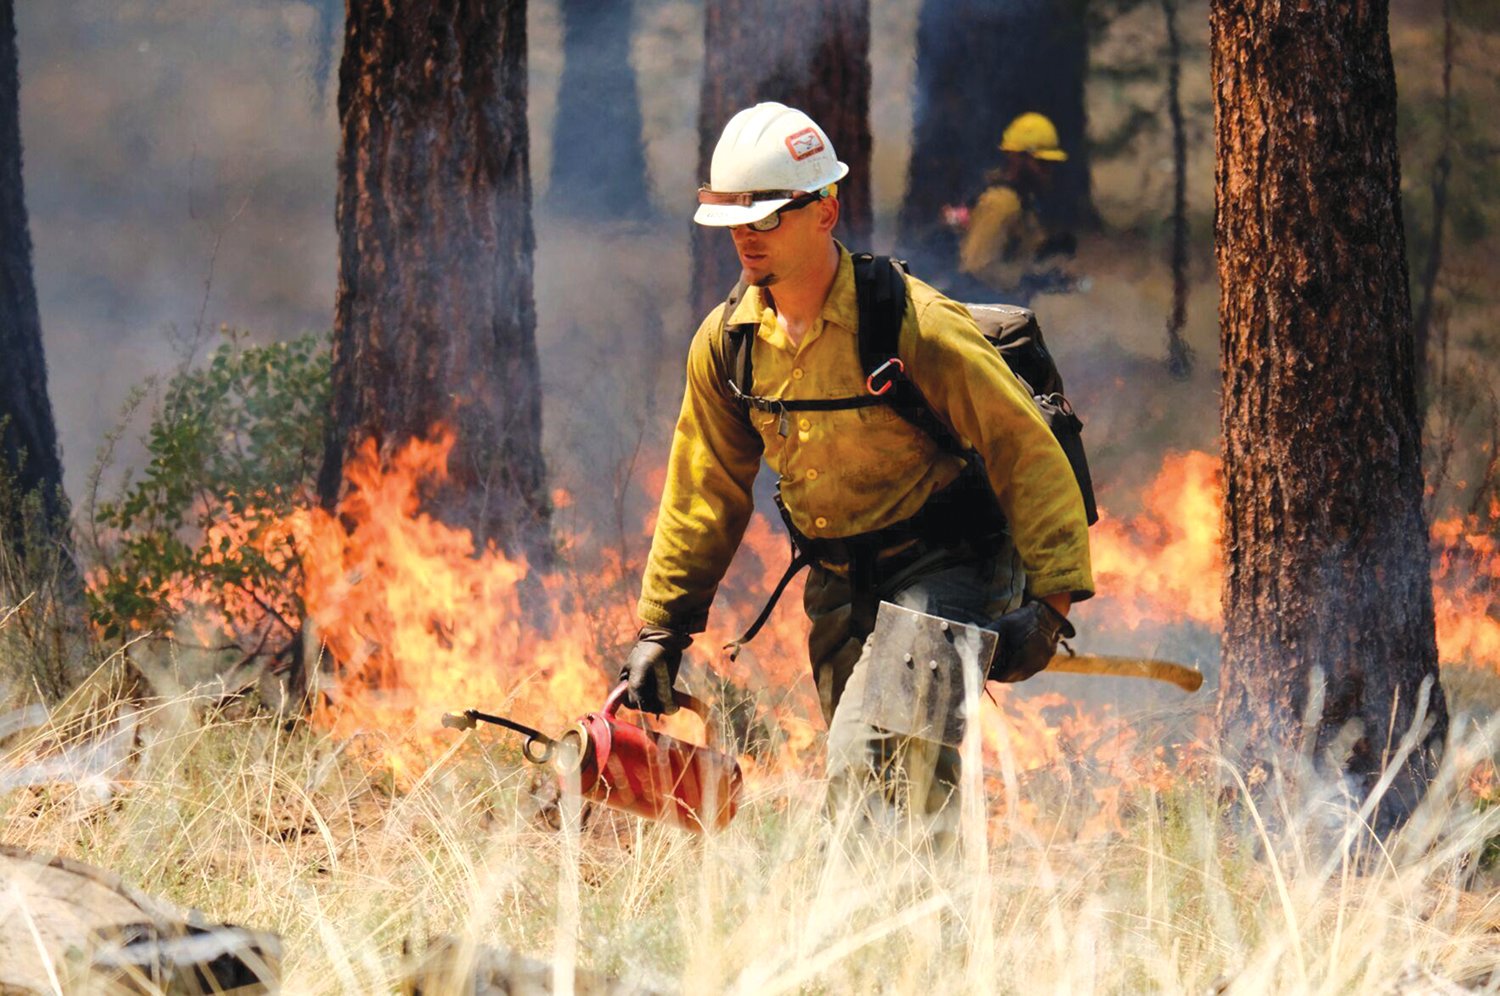 In this May 14, 2021, photo provided by the High Desert Museum, U.S. Forest Service firefighters carry out a prescribed burn on the grounds of the High Desert Museum, near Bend, Oregon. The prescribed burn is part of a massive effort in wildlands across the West to prepare for a fire season that follows the worst one on record.